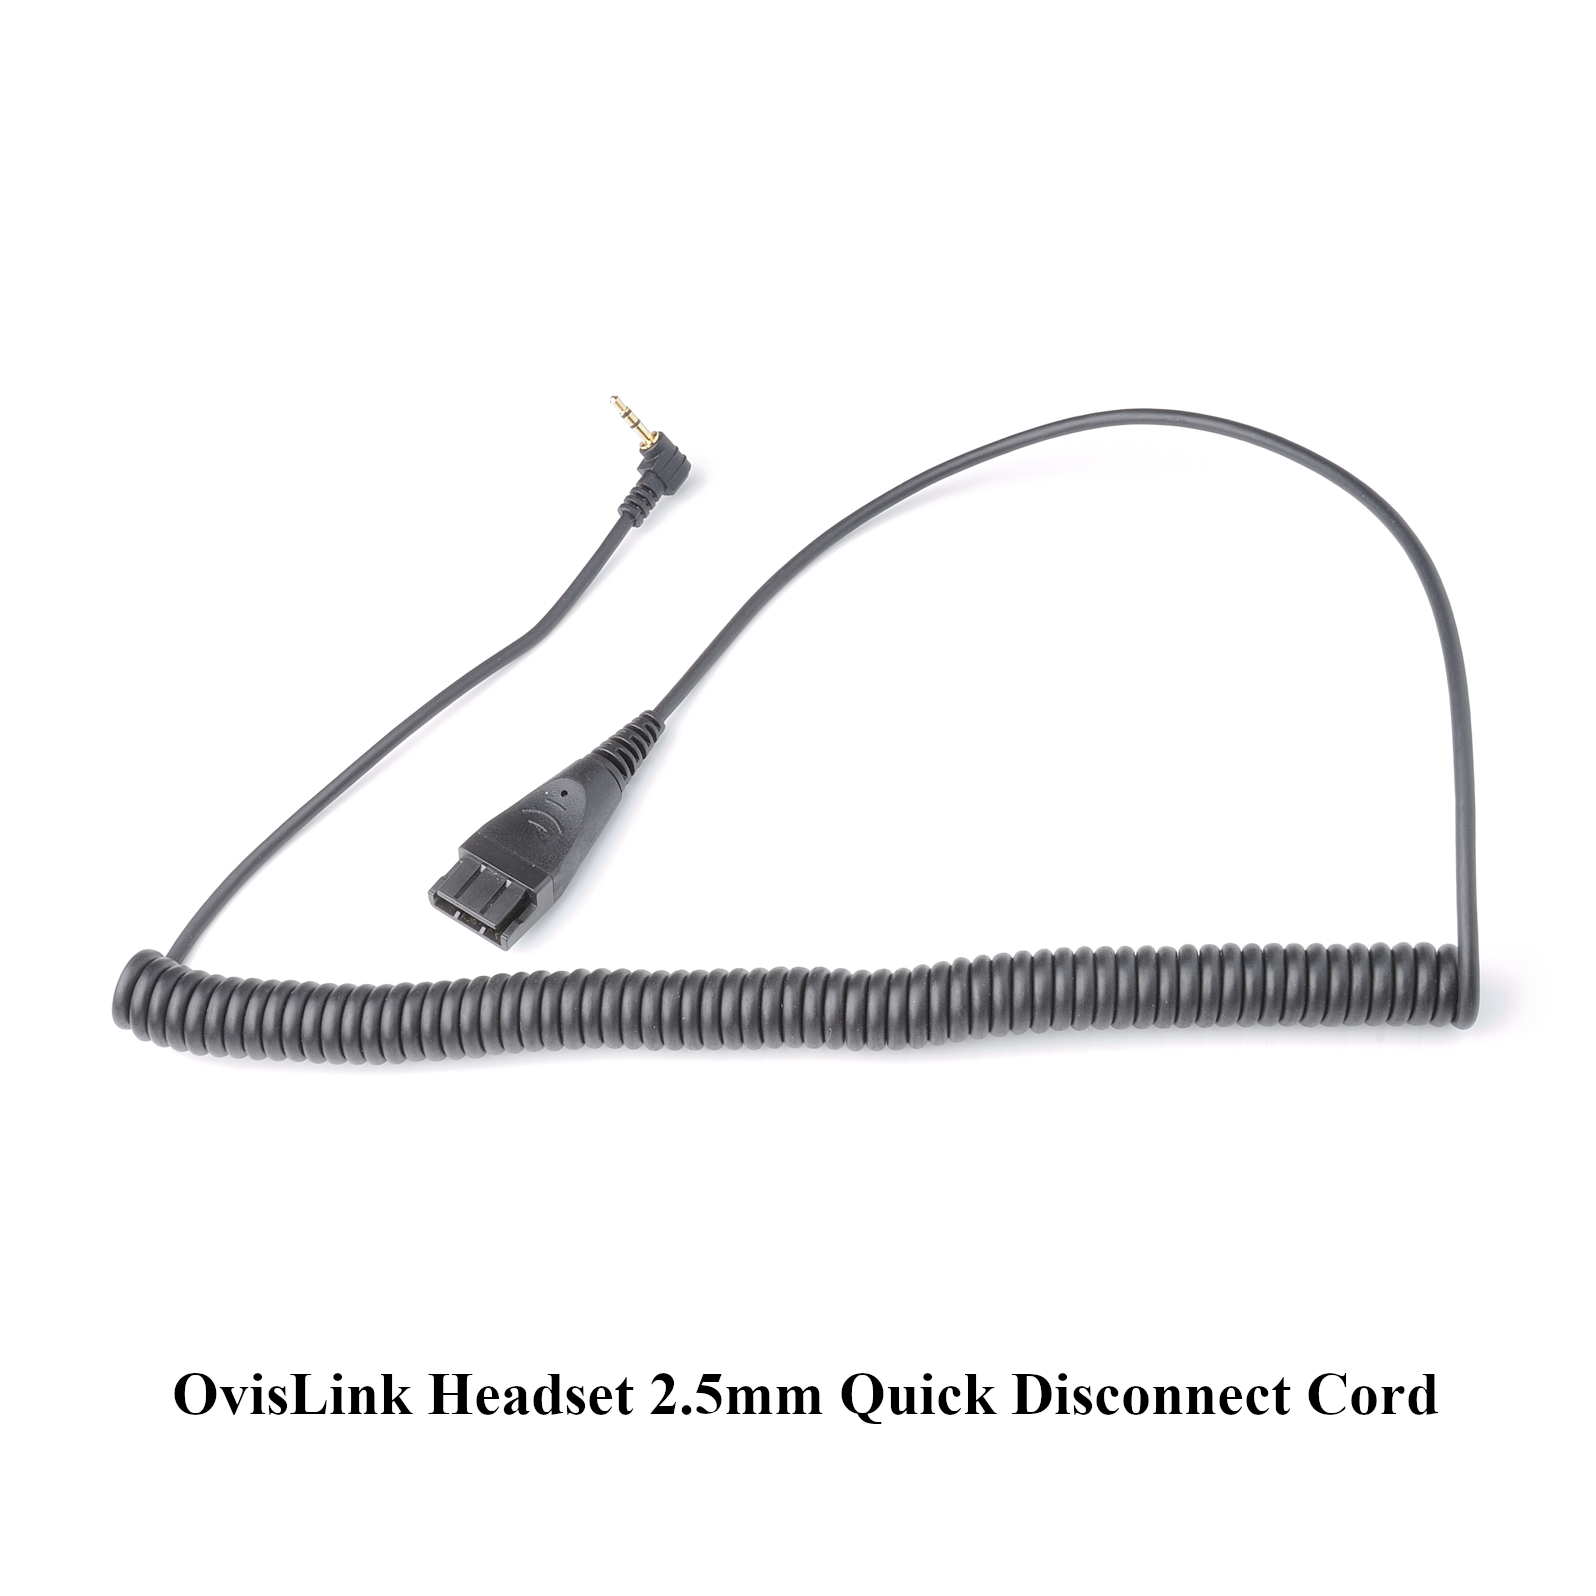 OvisLink Headset 2.5mm Quick Disconnect Cord QD-25 small